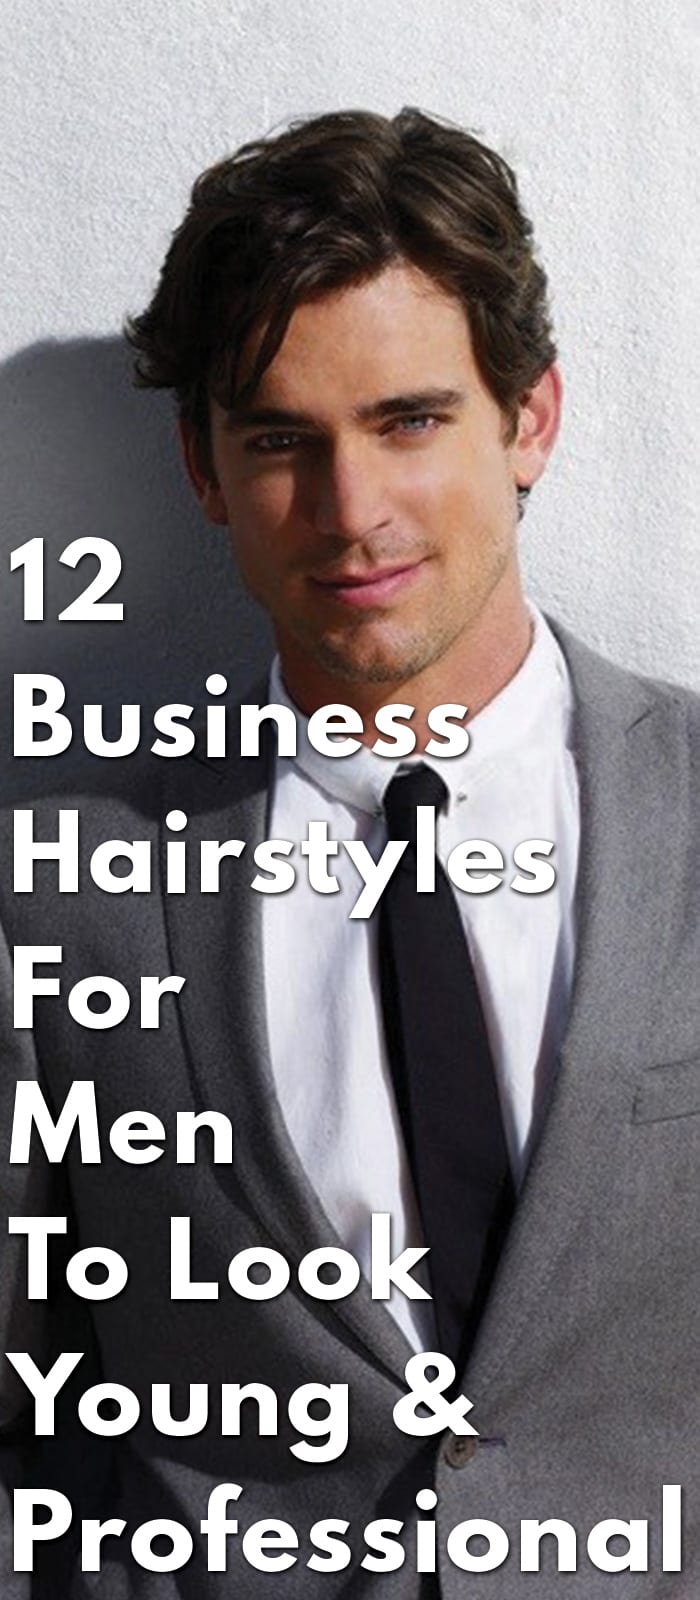 12-Business-Hairstyles-For-Men-To-Look-Young-&-Professional